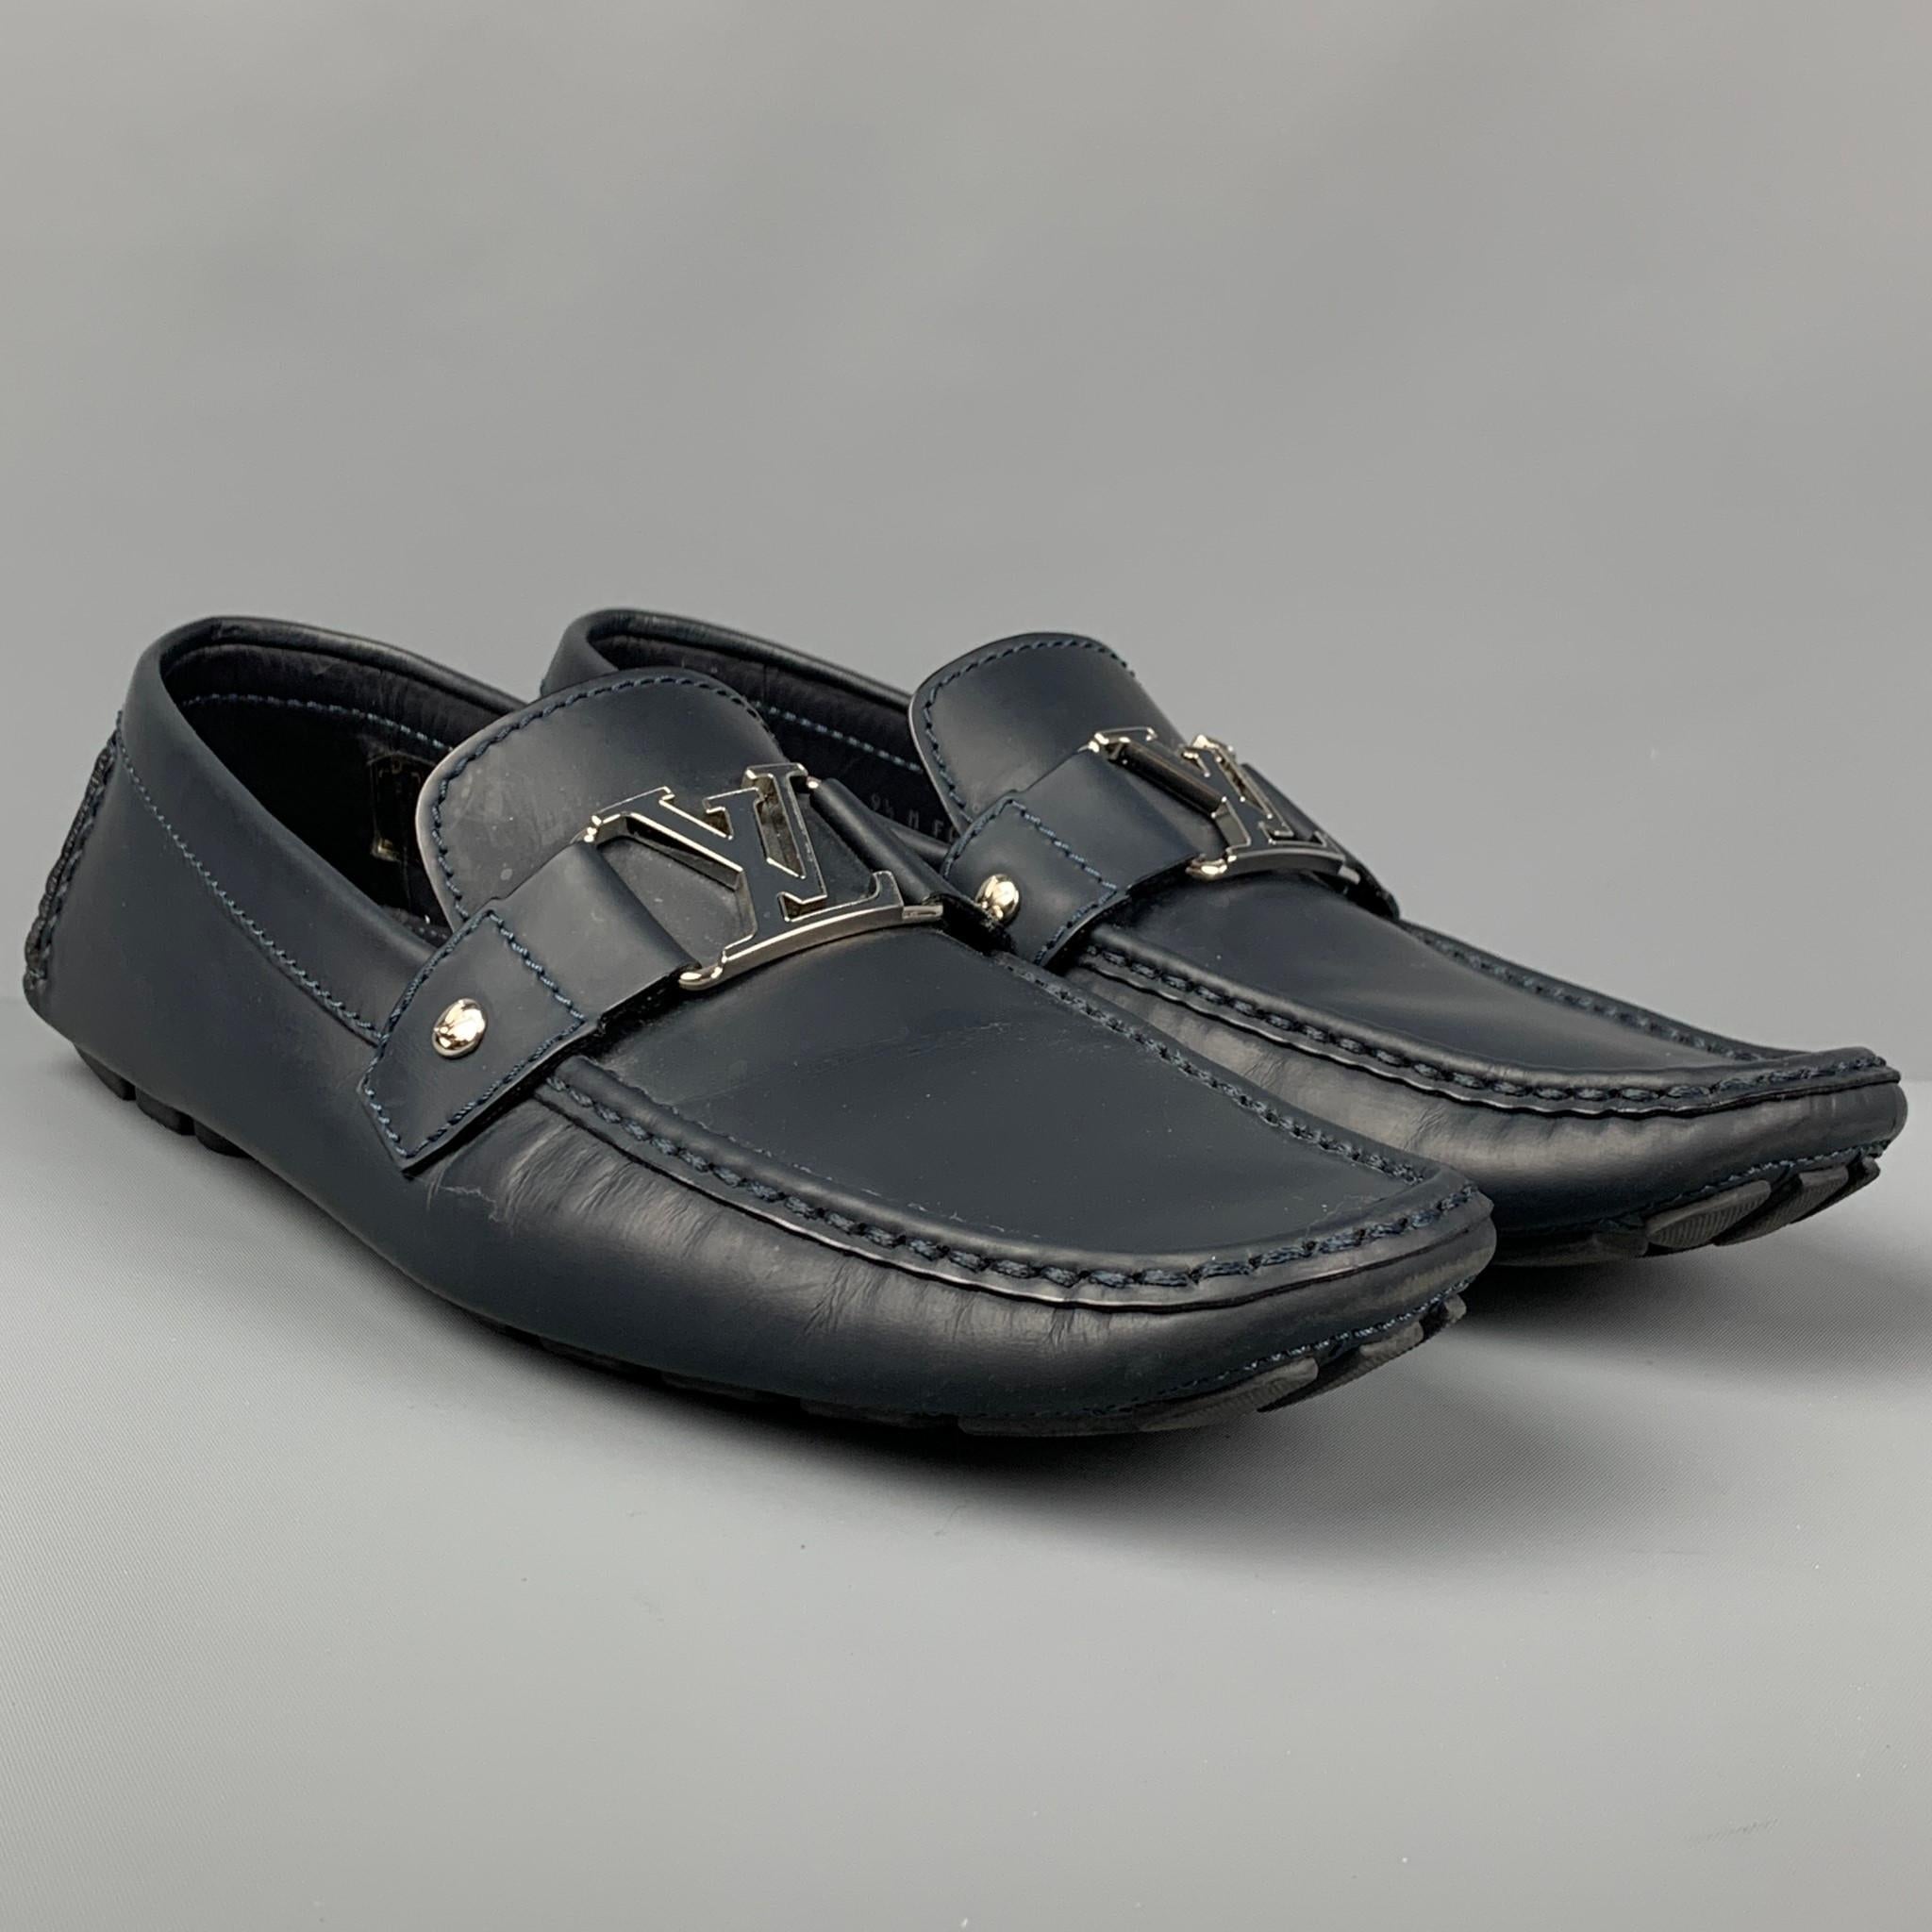 Louis Vuitton Drivers - For Sale on 1stDibs  lv drivers, lv topsider, louis  vuitton python loafers